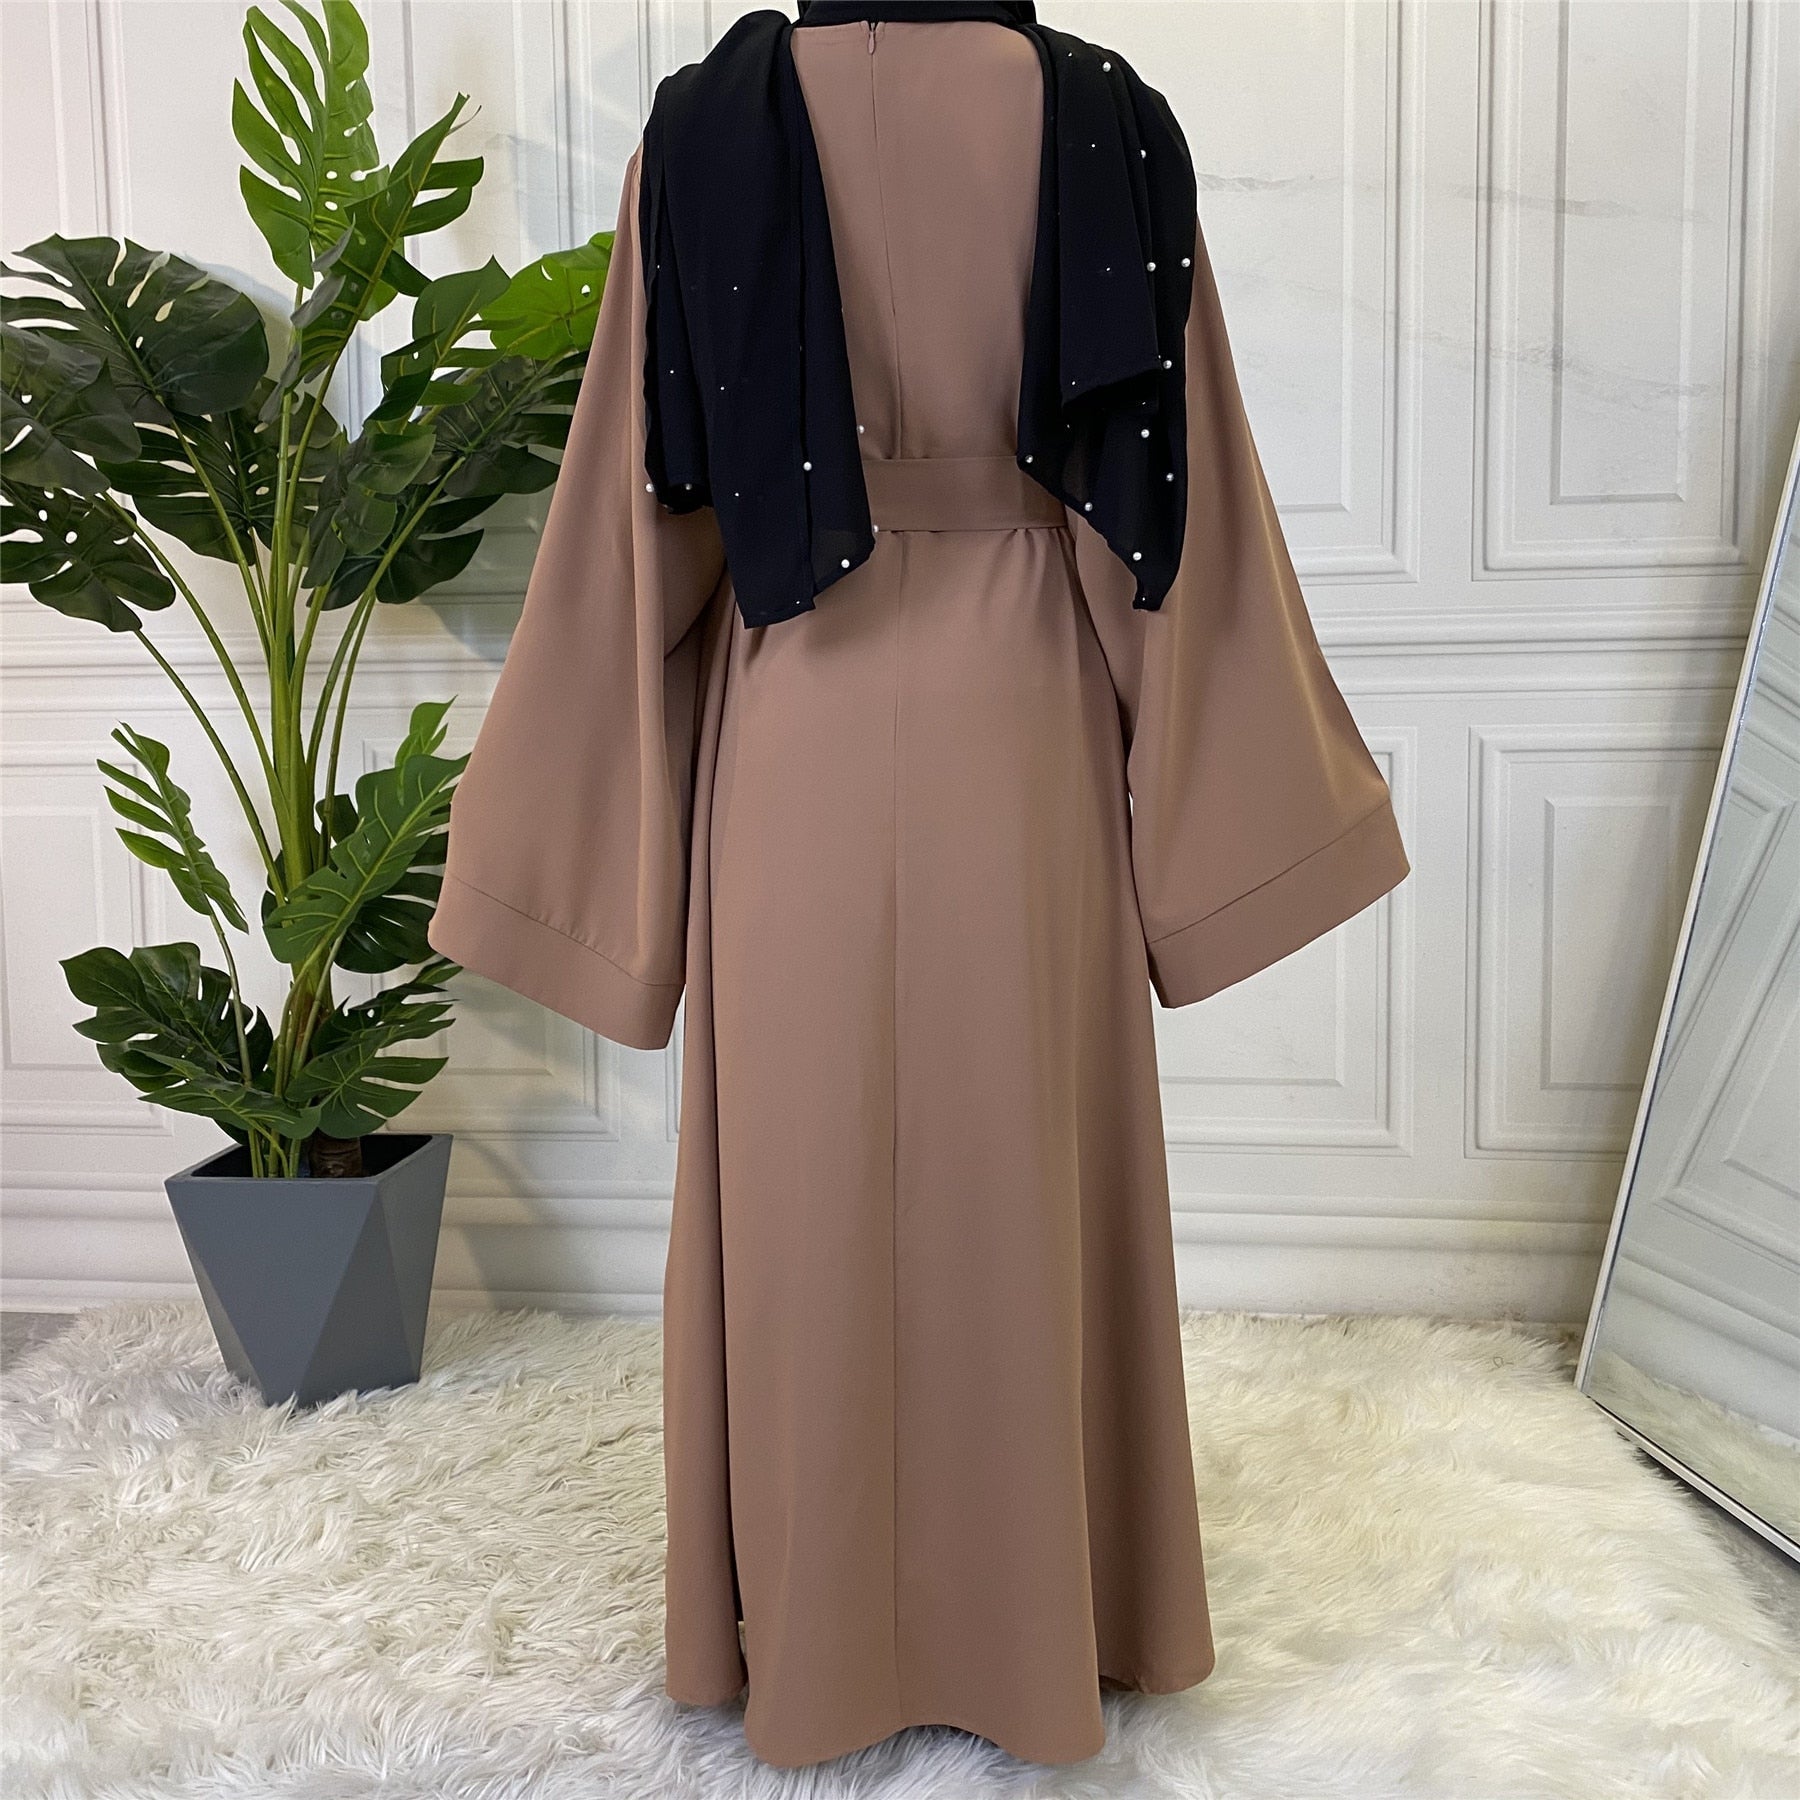 Chic and Modest: Muslim Fashion Hijab Dubai Abaya Long Dresses with Sashes for Women - Flexi Africa - Flexi Africa offers Free Delivery Worldwide - Vibrant African traditional clothing showcasing bold prints and intricate designs